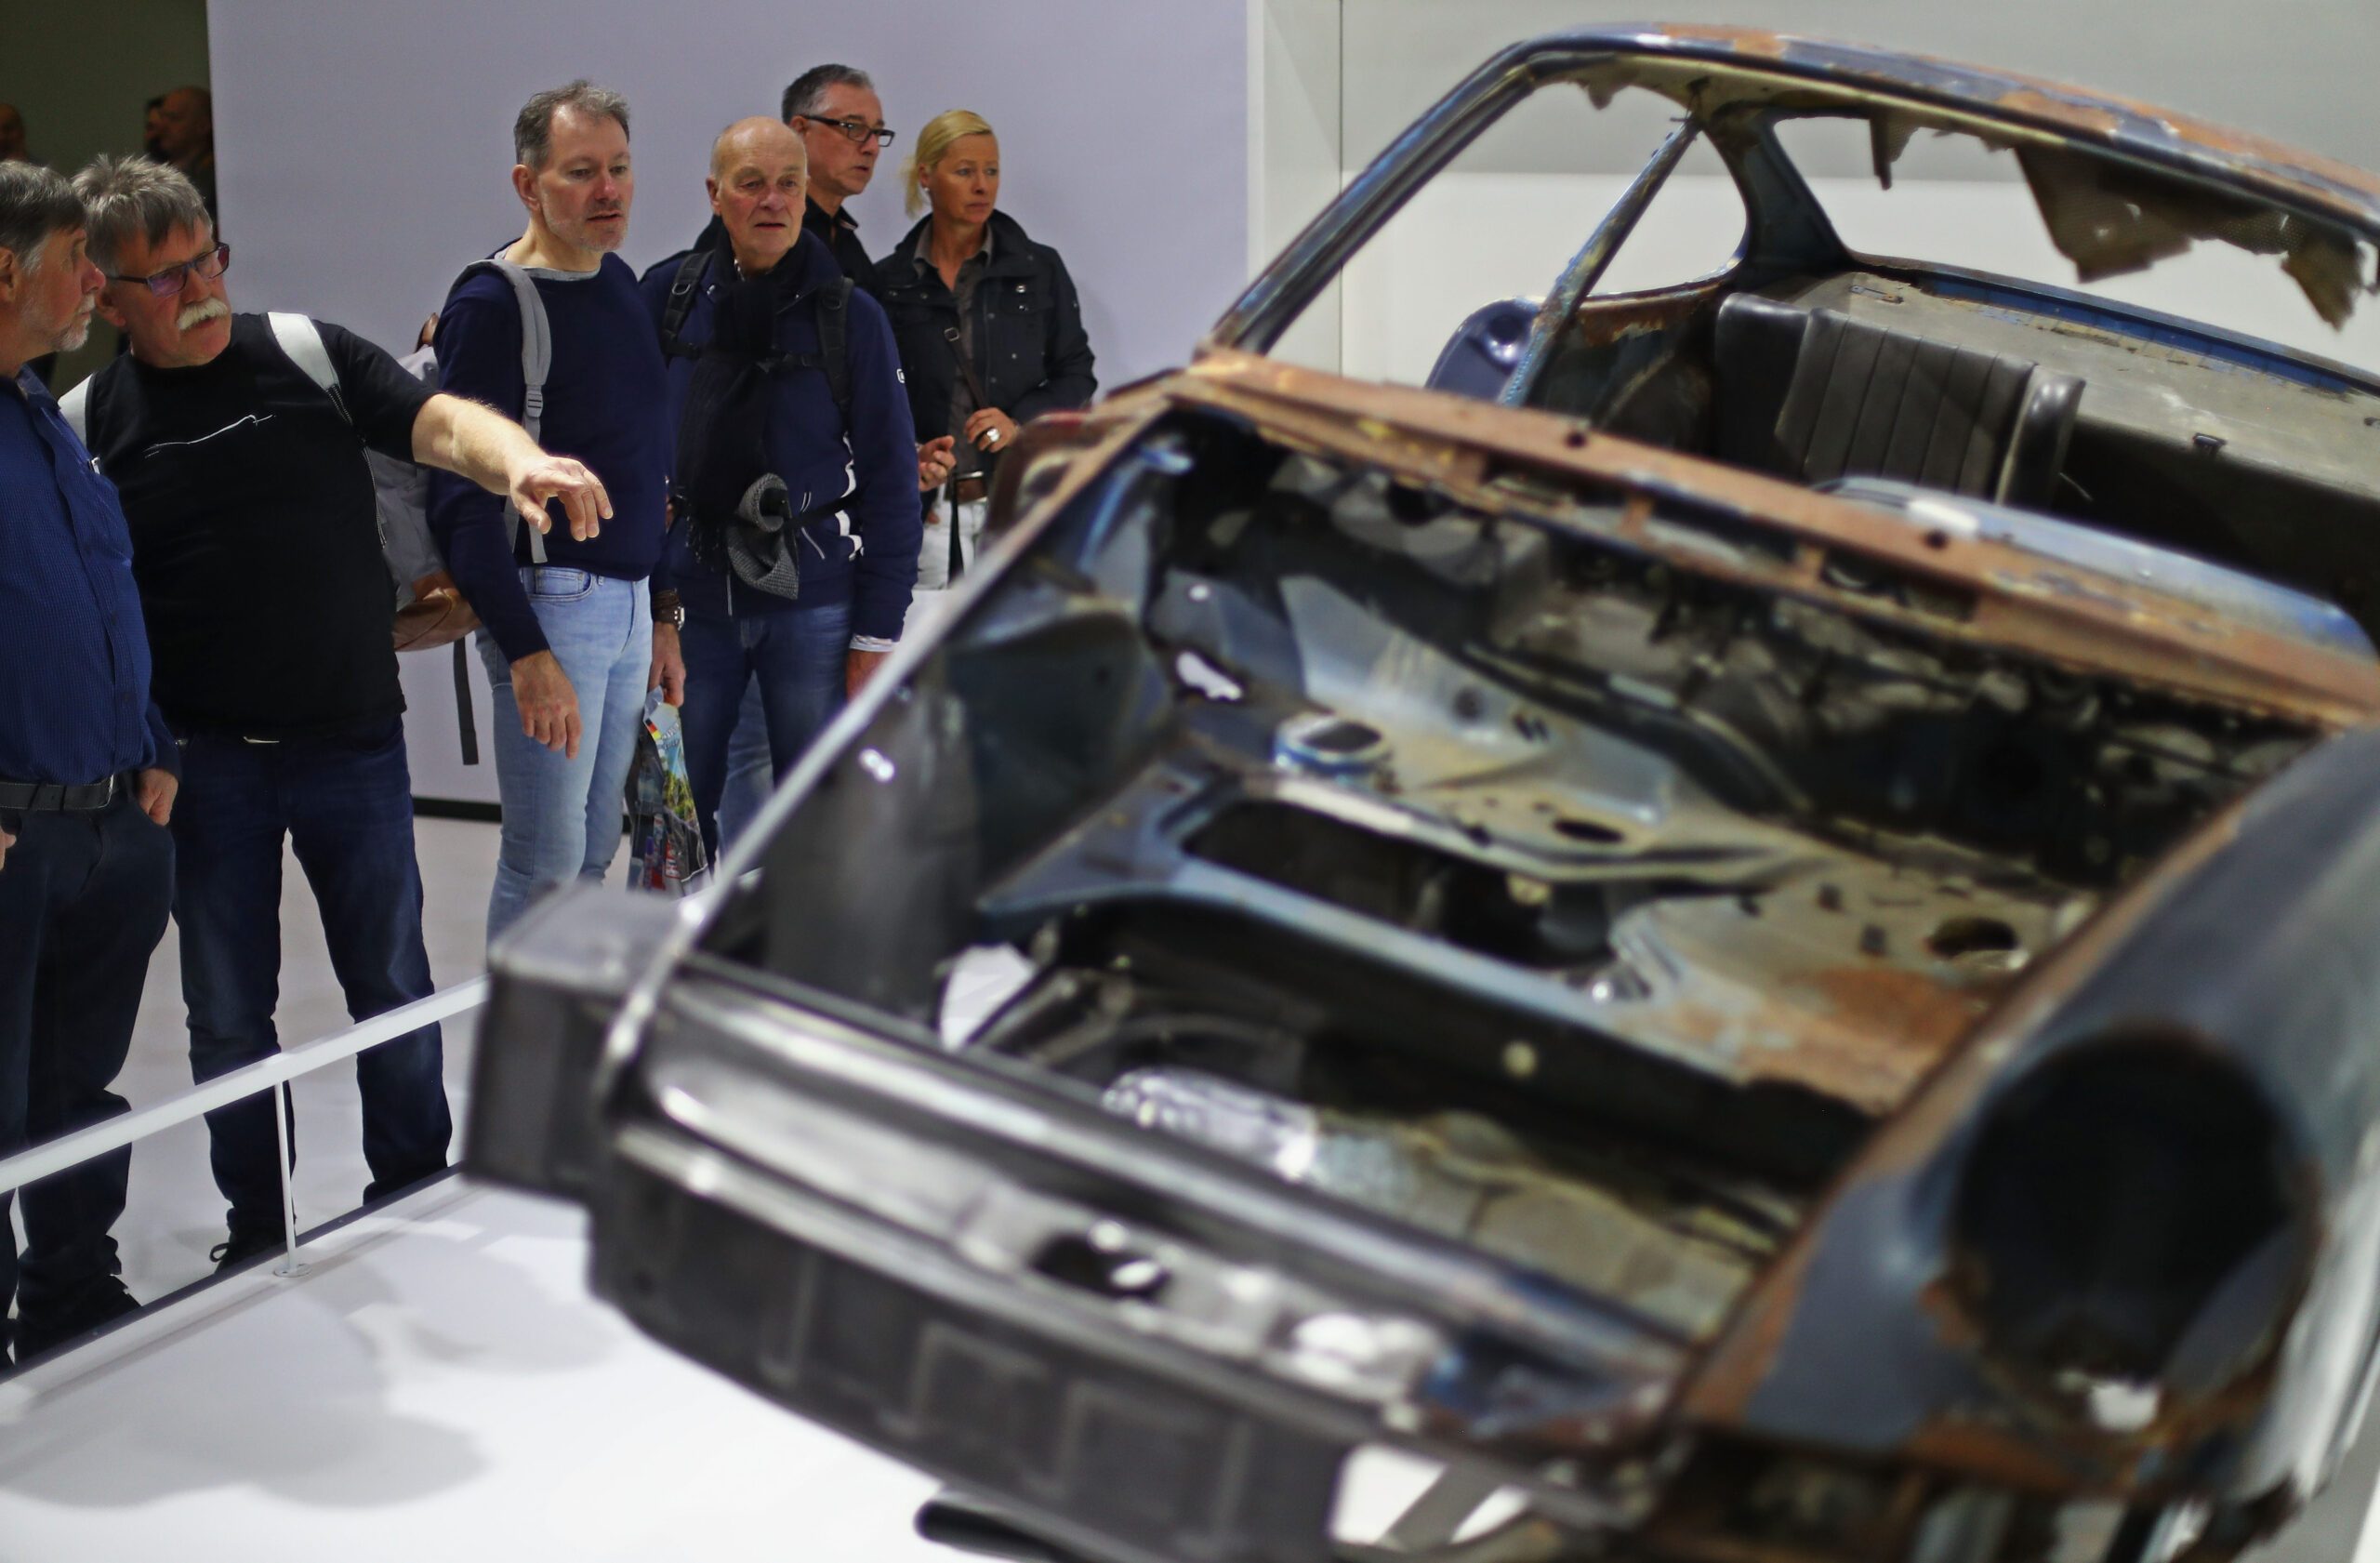 How the pros use forensic analysis to authenticate collector cars